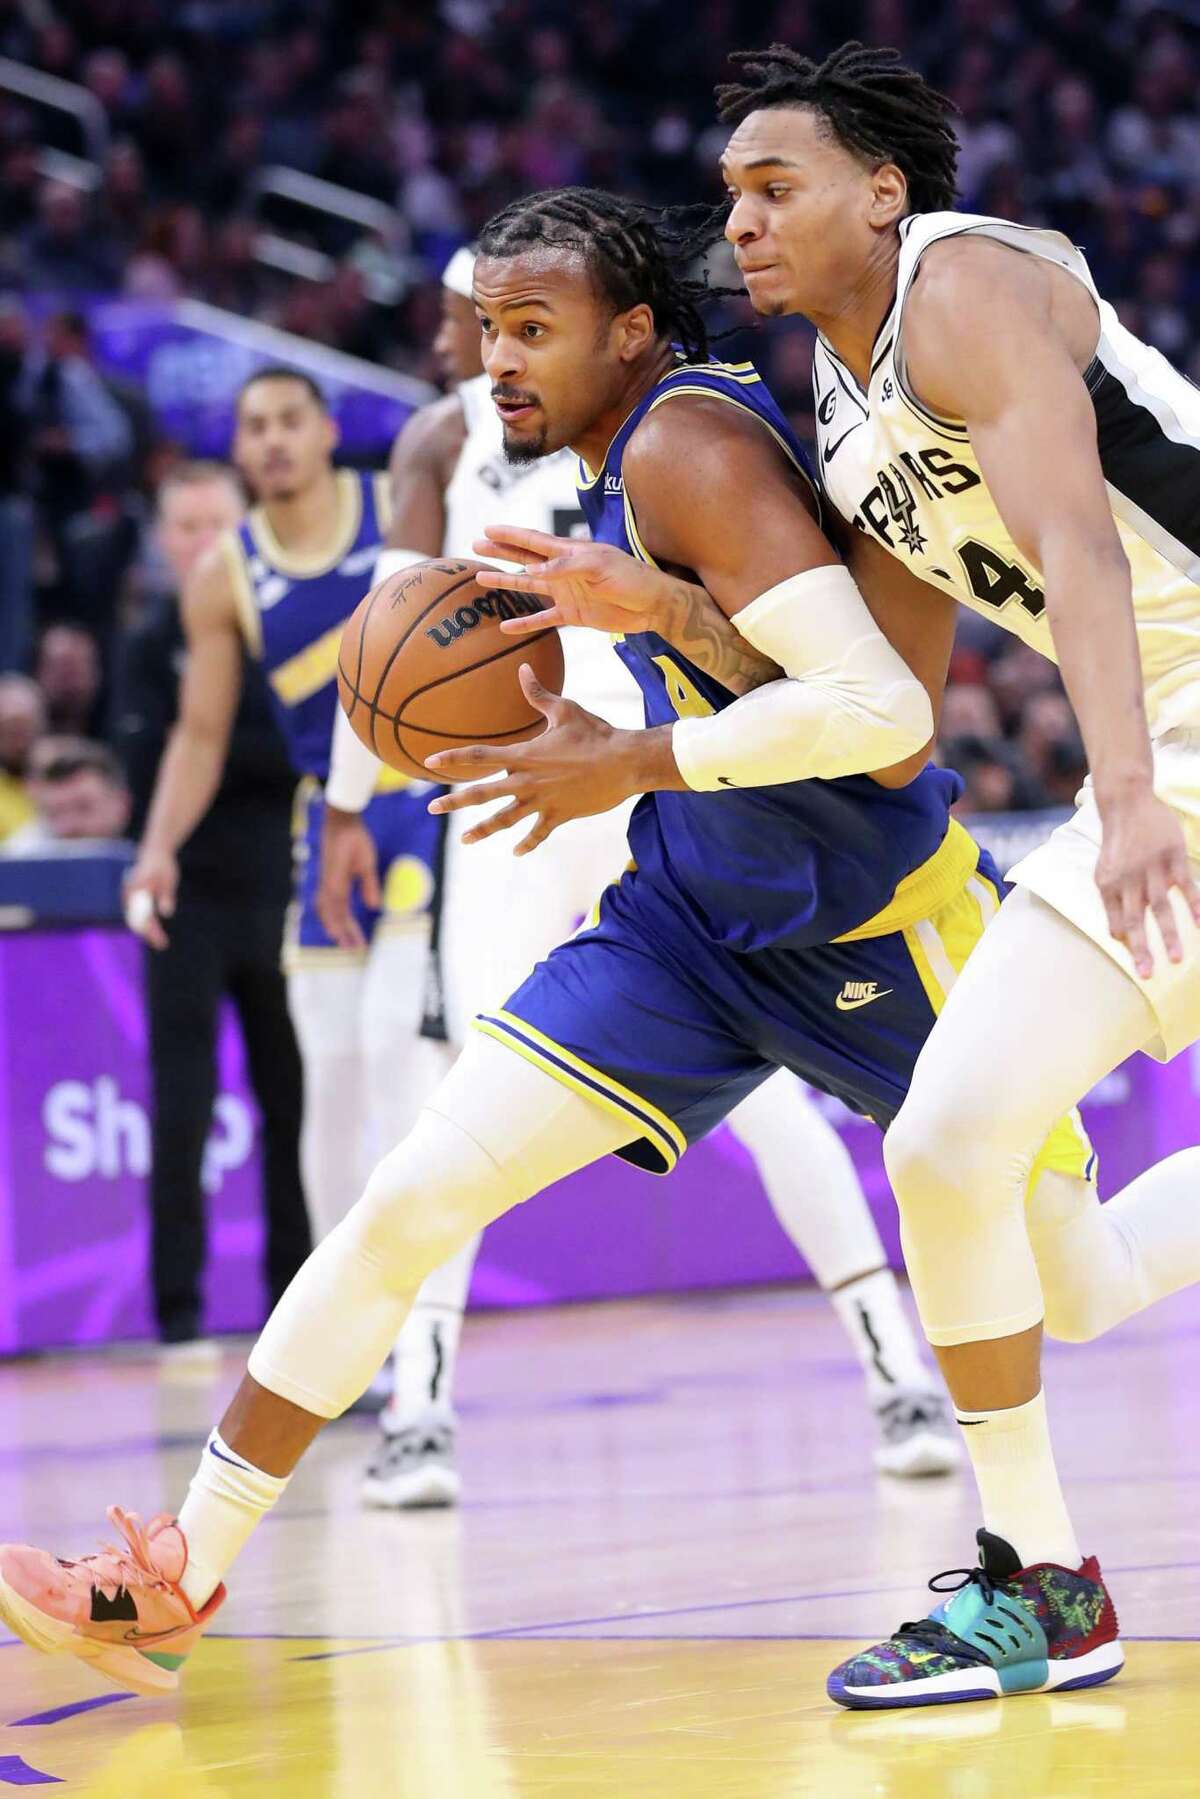 Golden State Warriors’ Moses Moody drives against San Antonio Spurs’ Devin Vassell in 1st quarter during NBA game at Chase Center in San Francisco, Calif., on Monday, November 14, 2022.